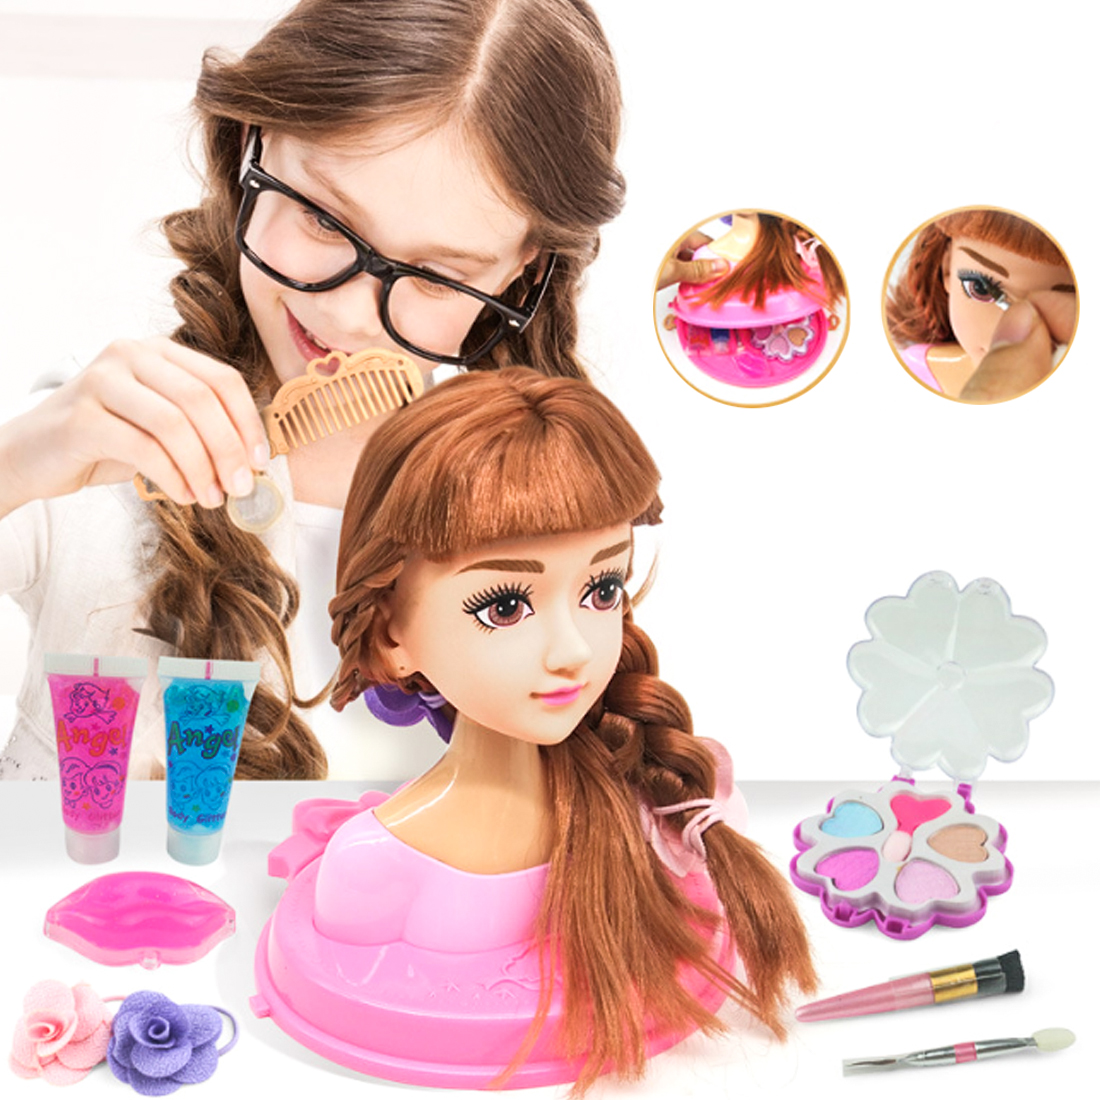 Head Model Half Body Doll Toy Makeup Hairstyle Play Toy - Random